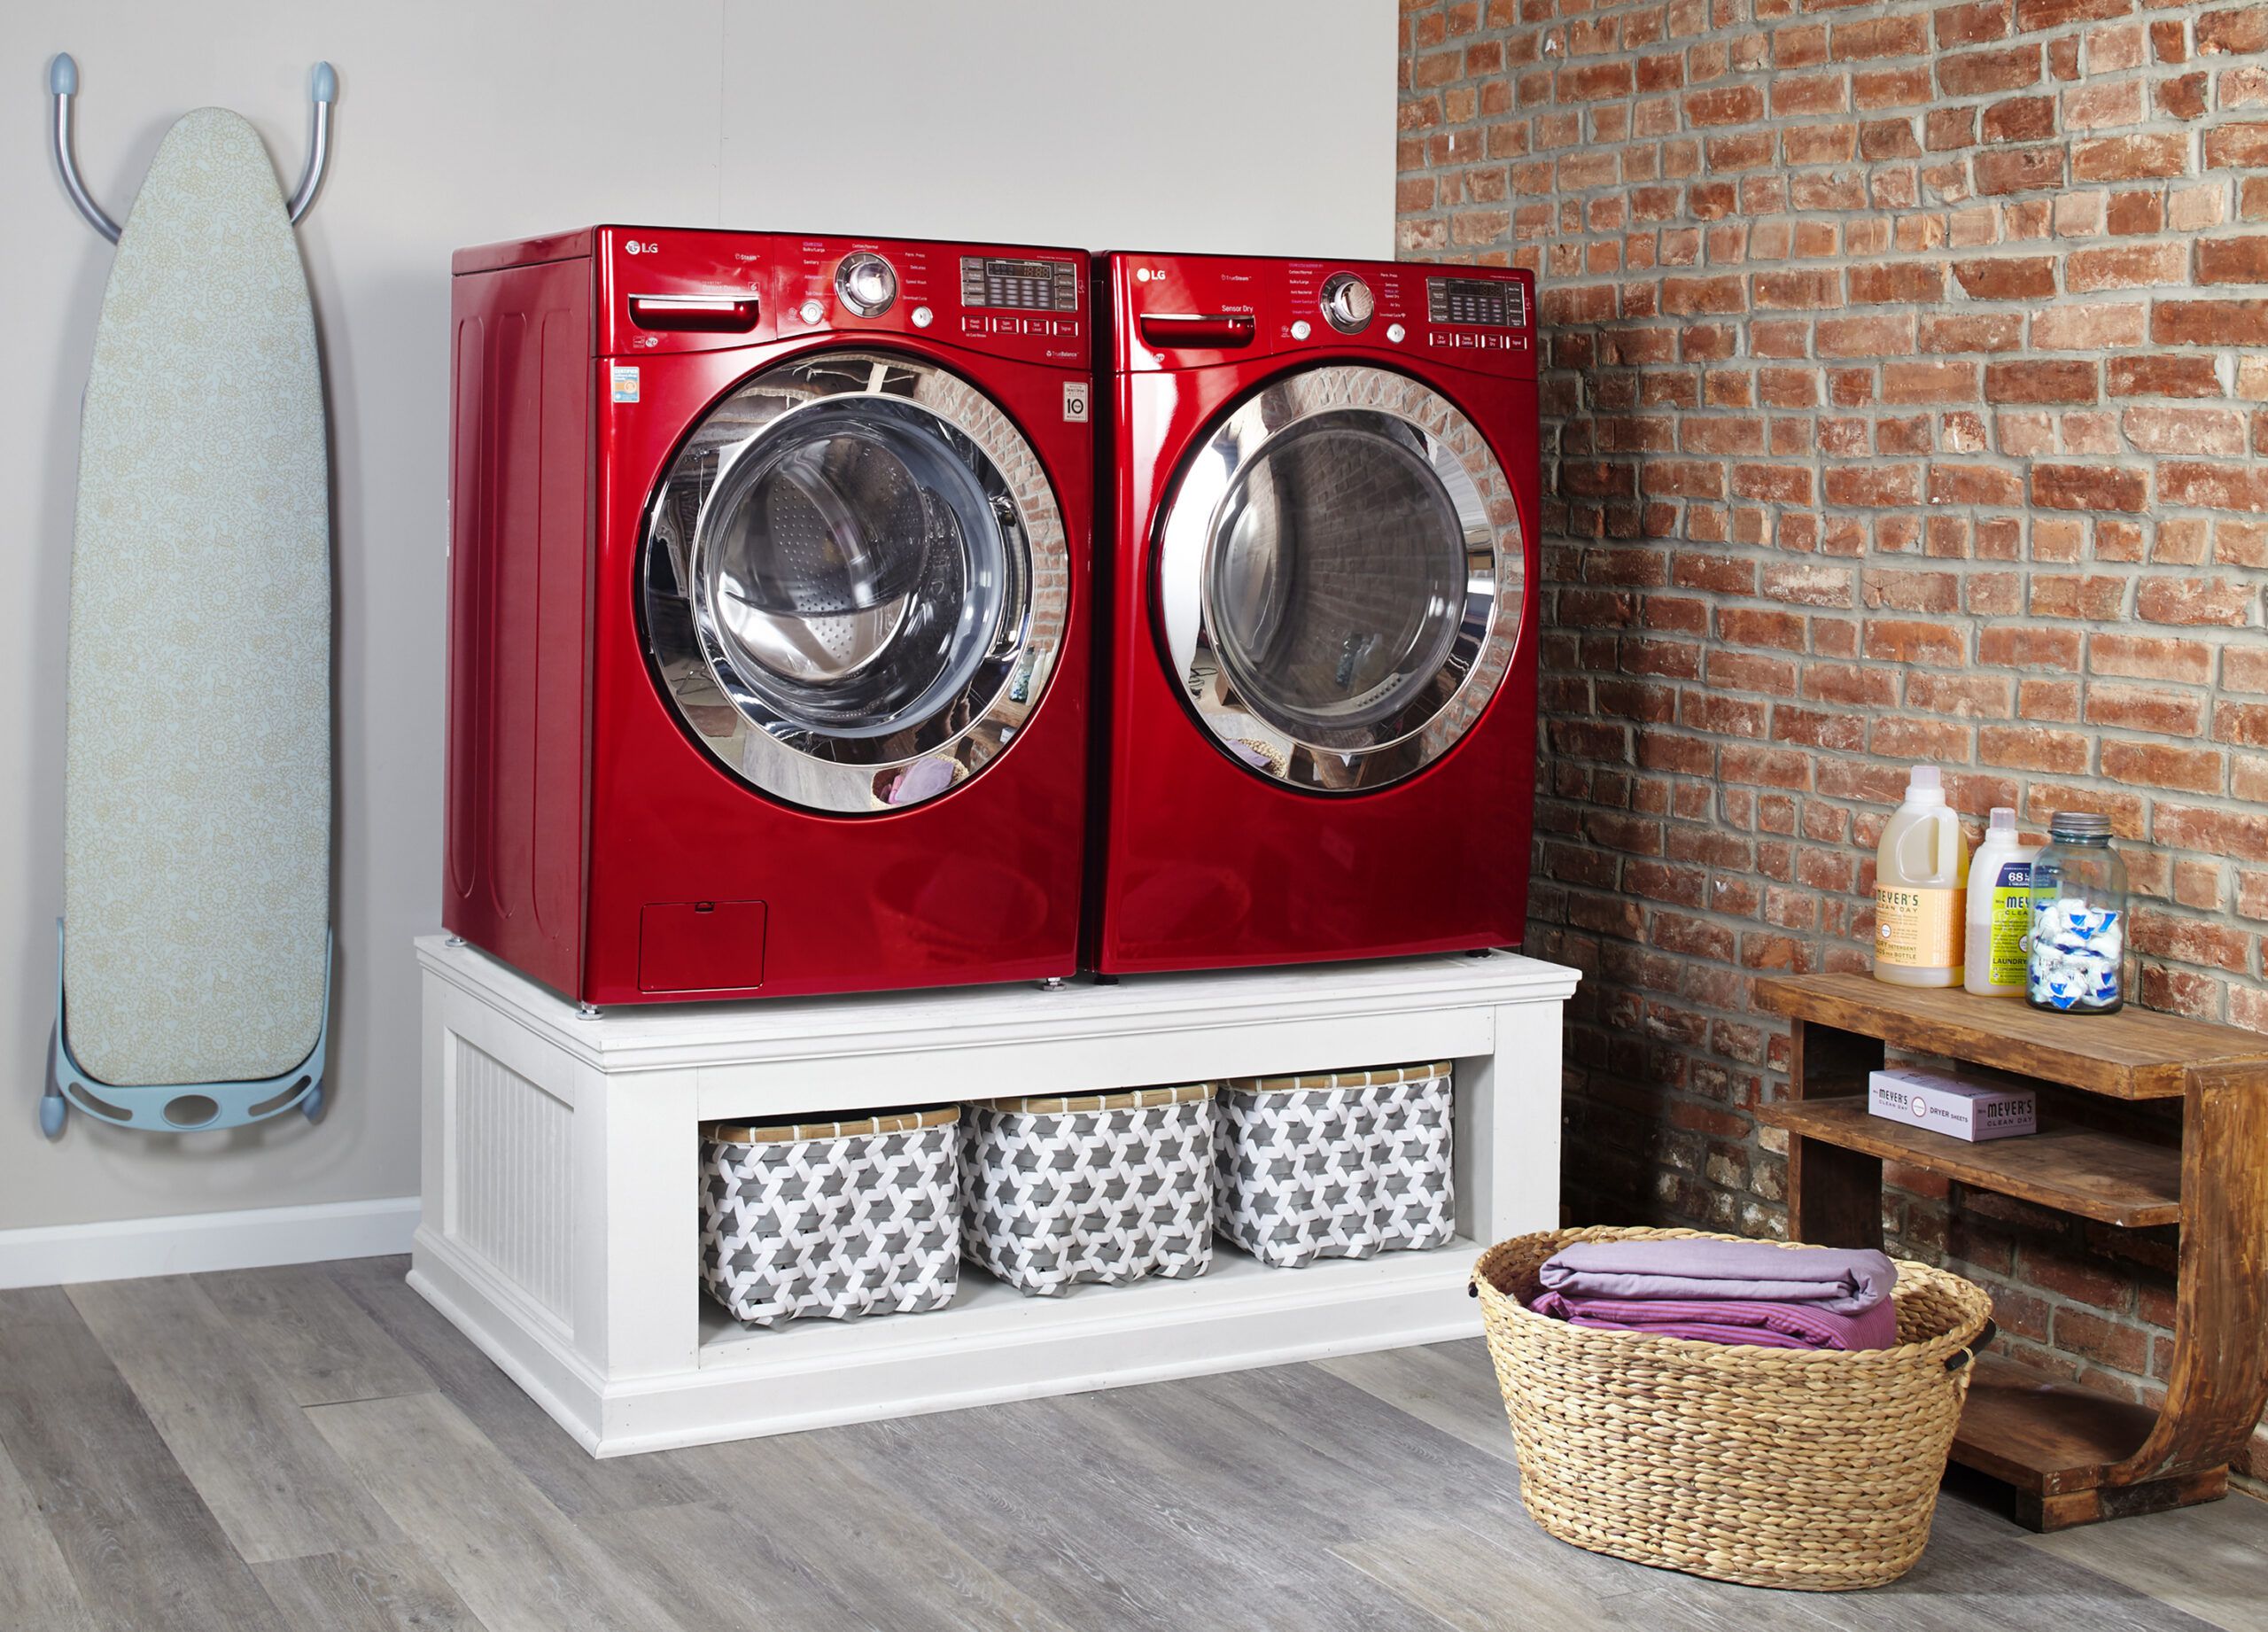 How To Build A Pedestal For Washer And Dryer | Storables